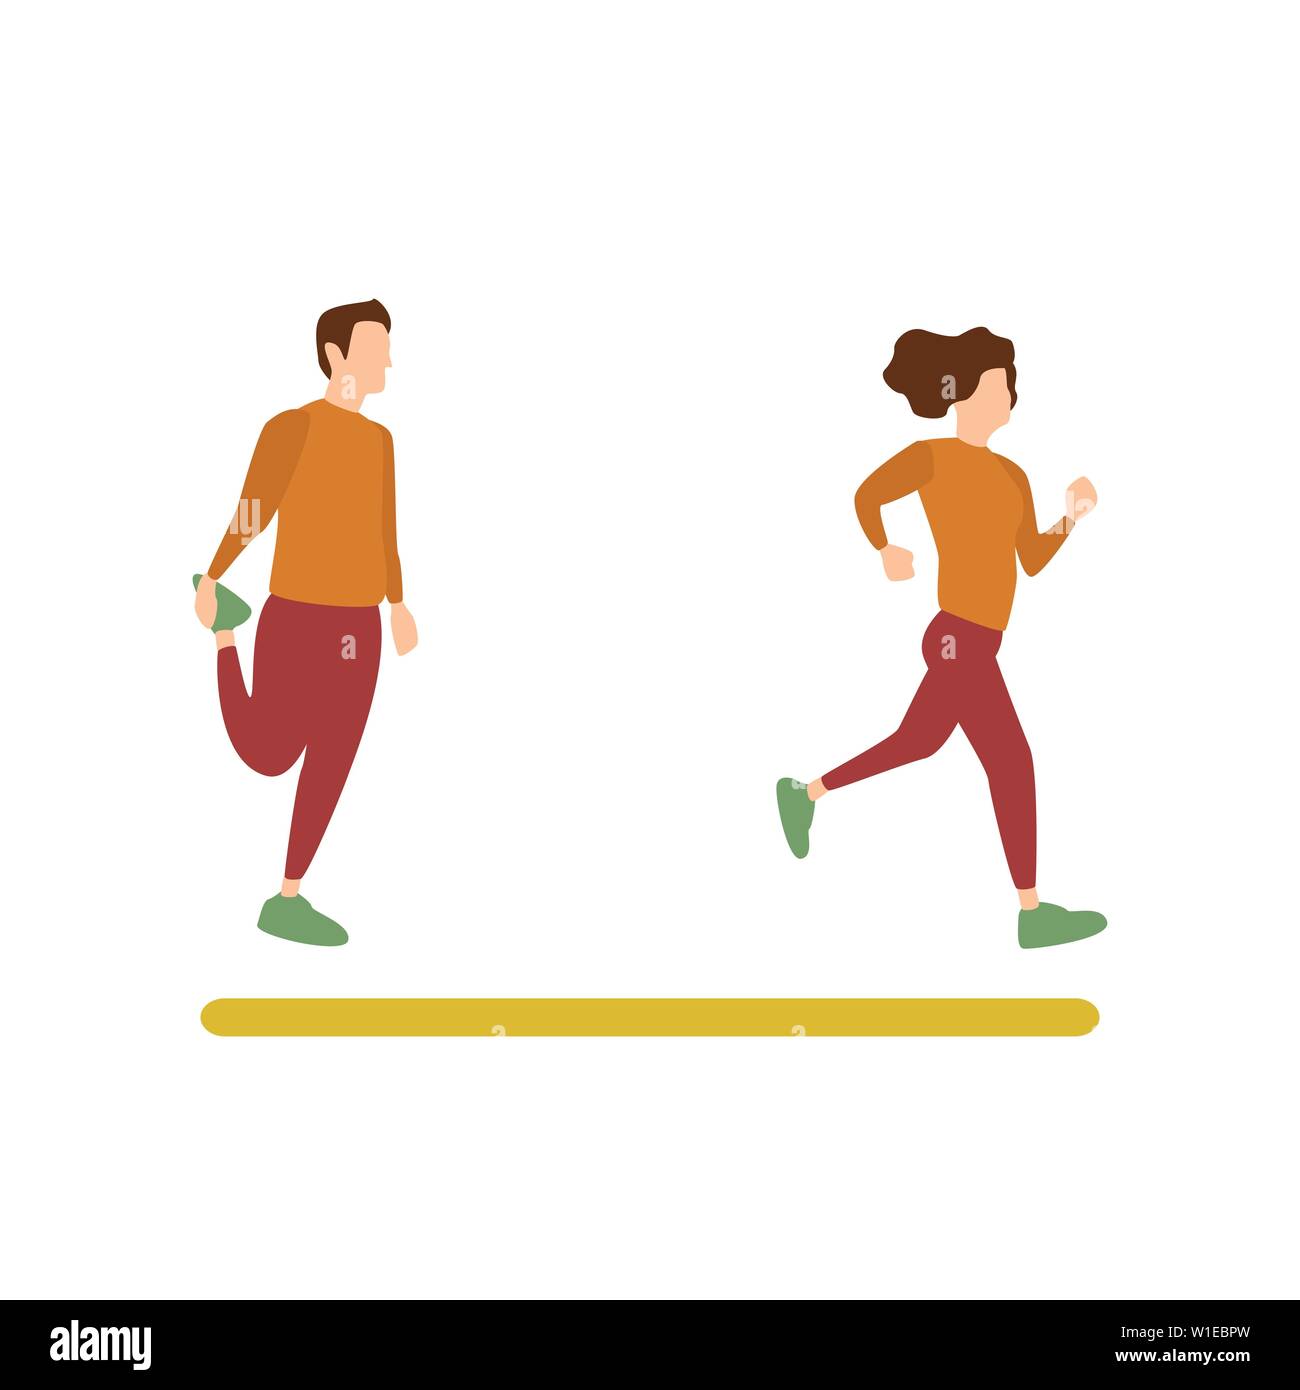 Flat Design Character of a Jogging Woman and a Man do Exercise, Human Activities Sport Stock Vector